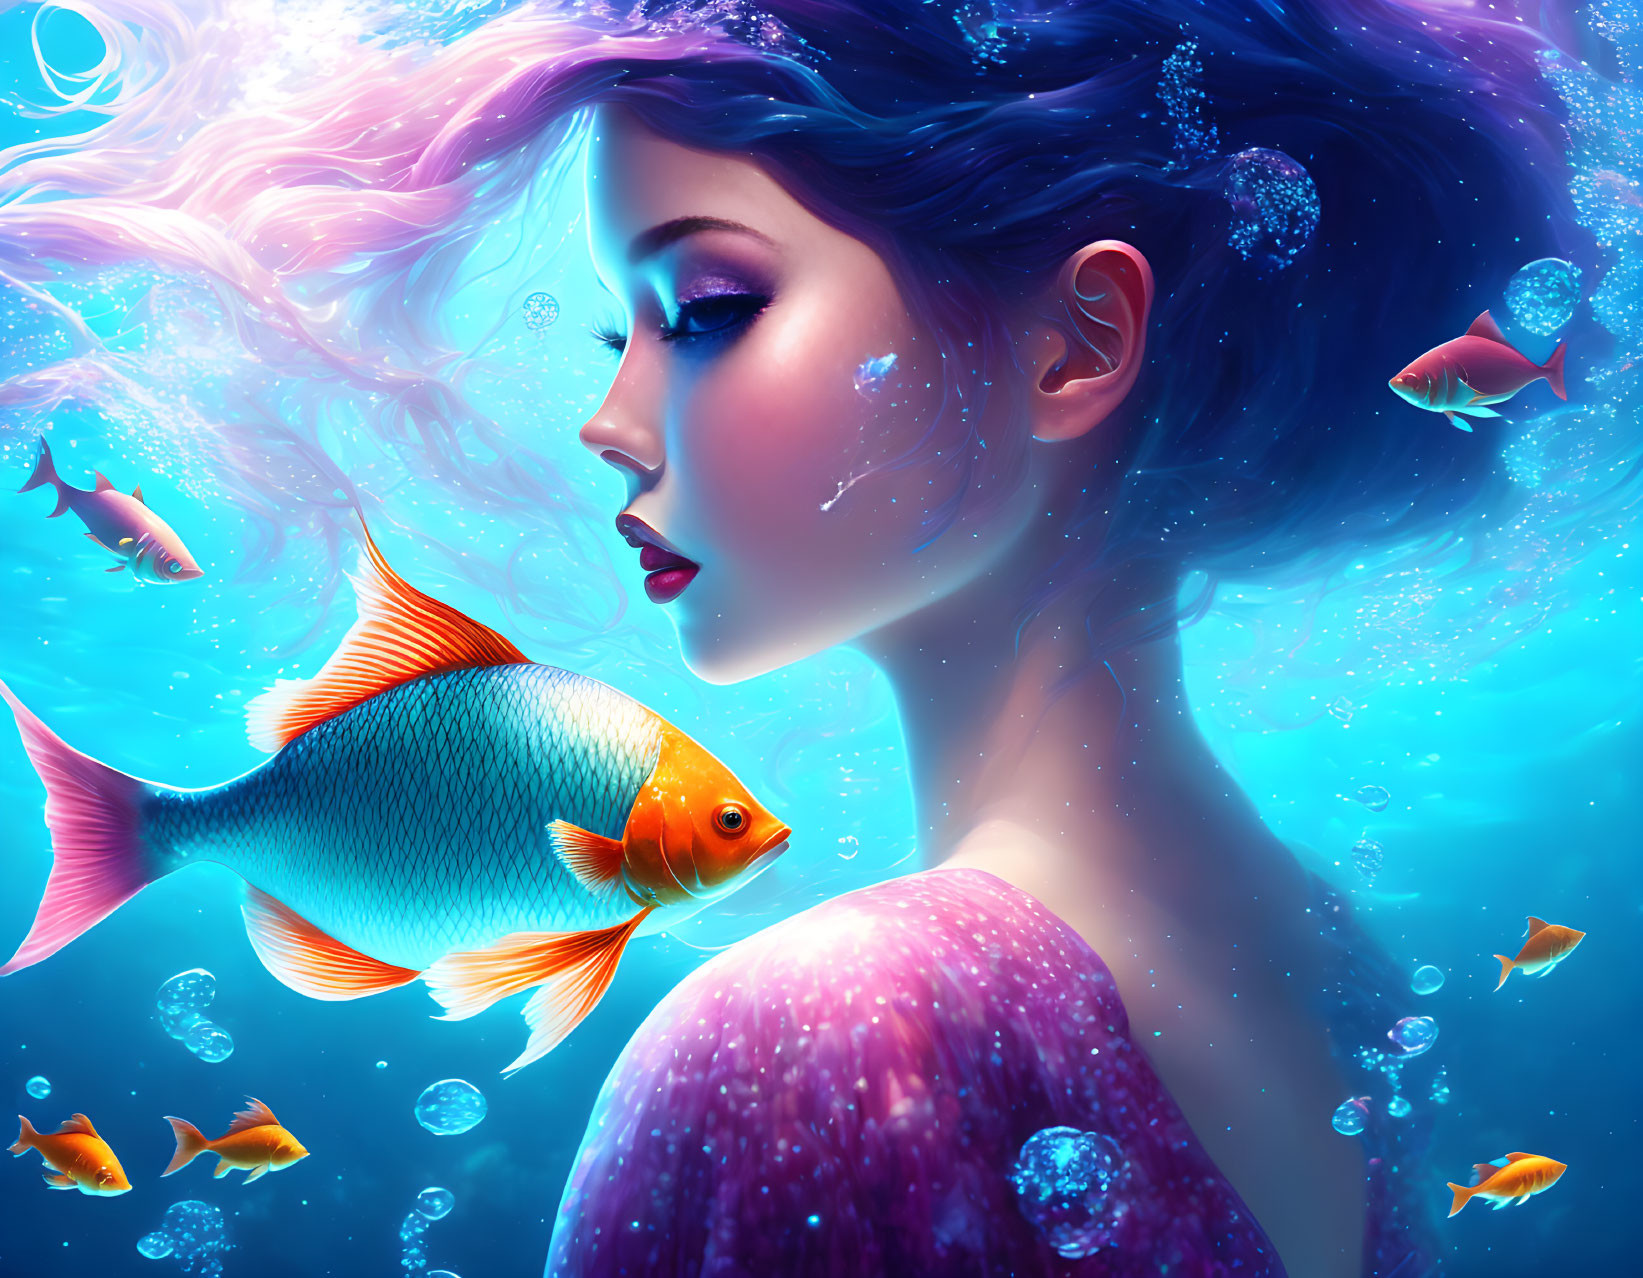 Woman submerged underwater with vibrant fish, adorned with ethereal qualities